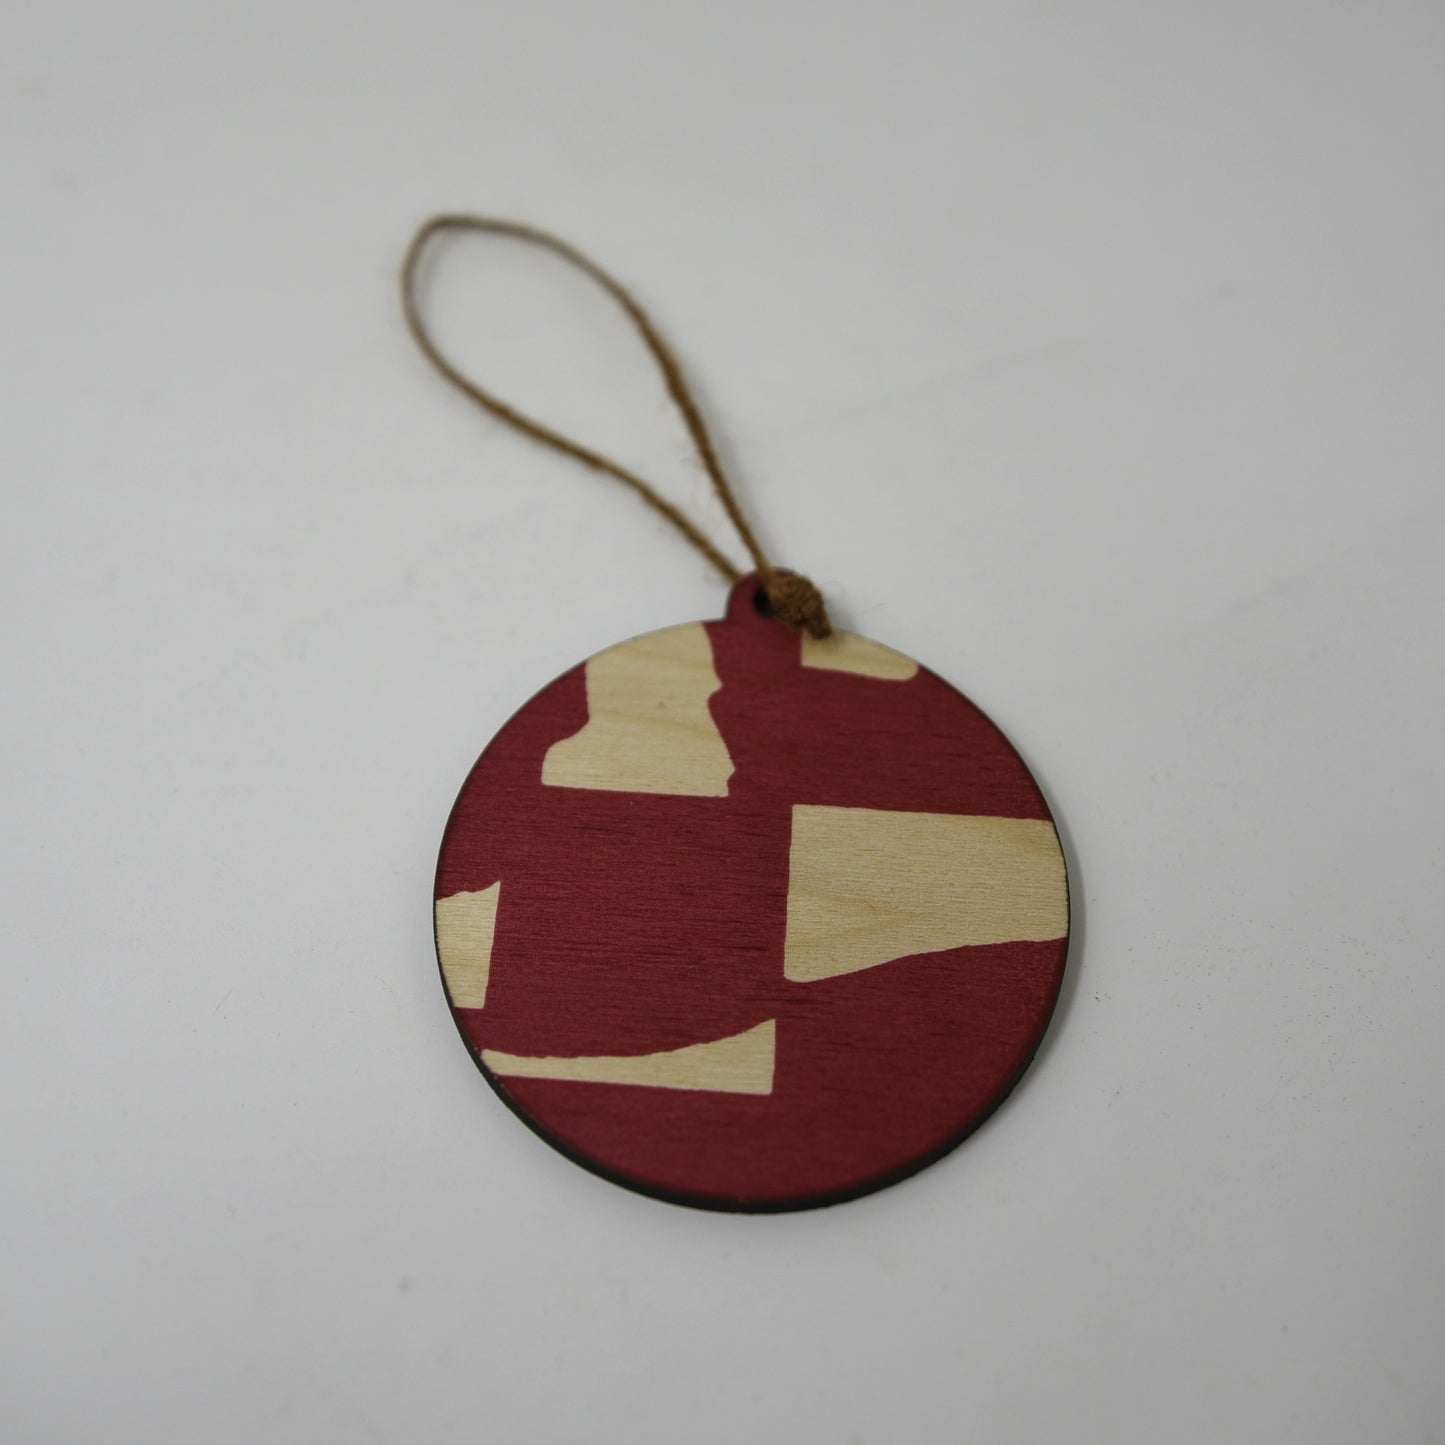 Reversible Wooden Tree Ornament in Red and Blue by Sophie Amelia